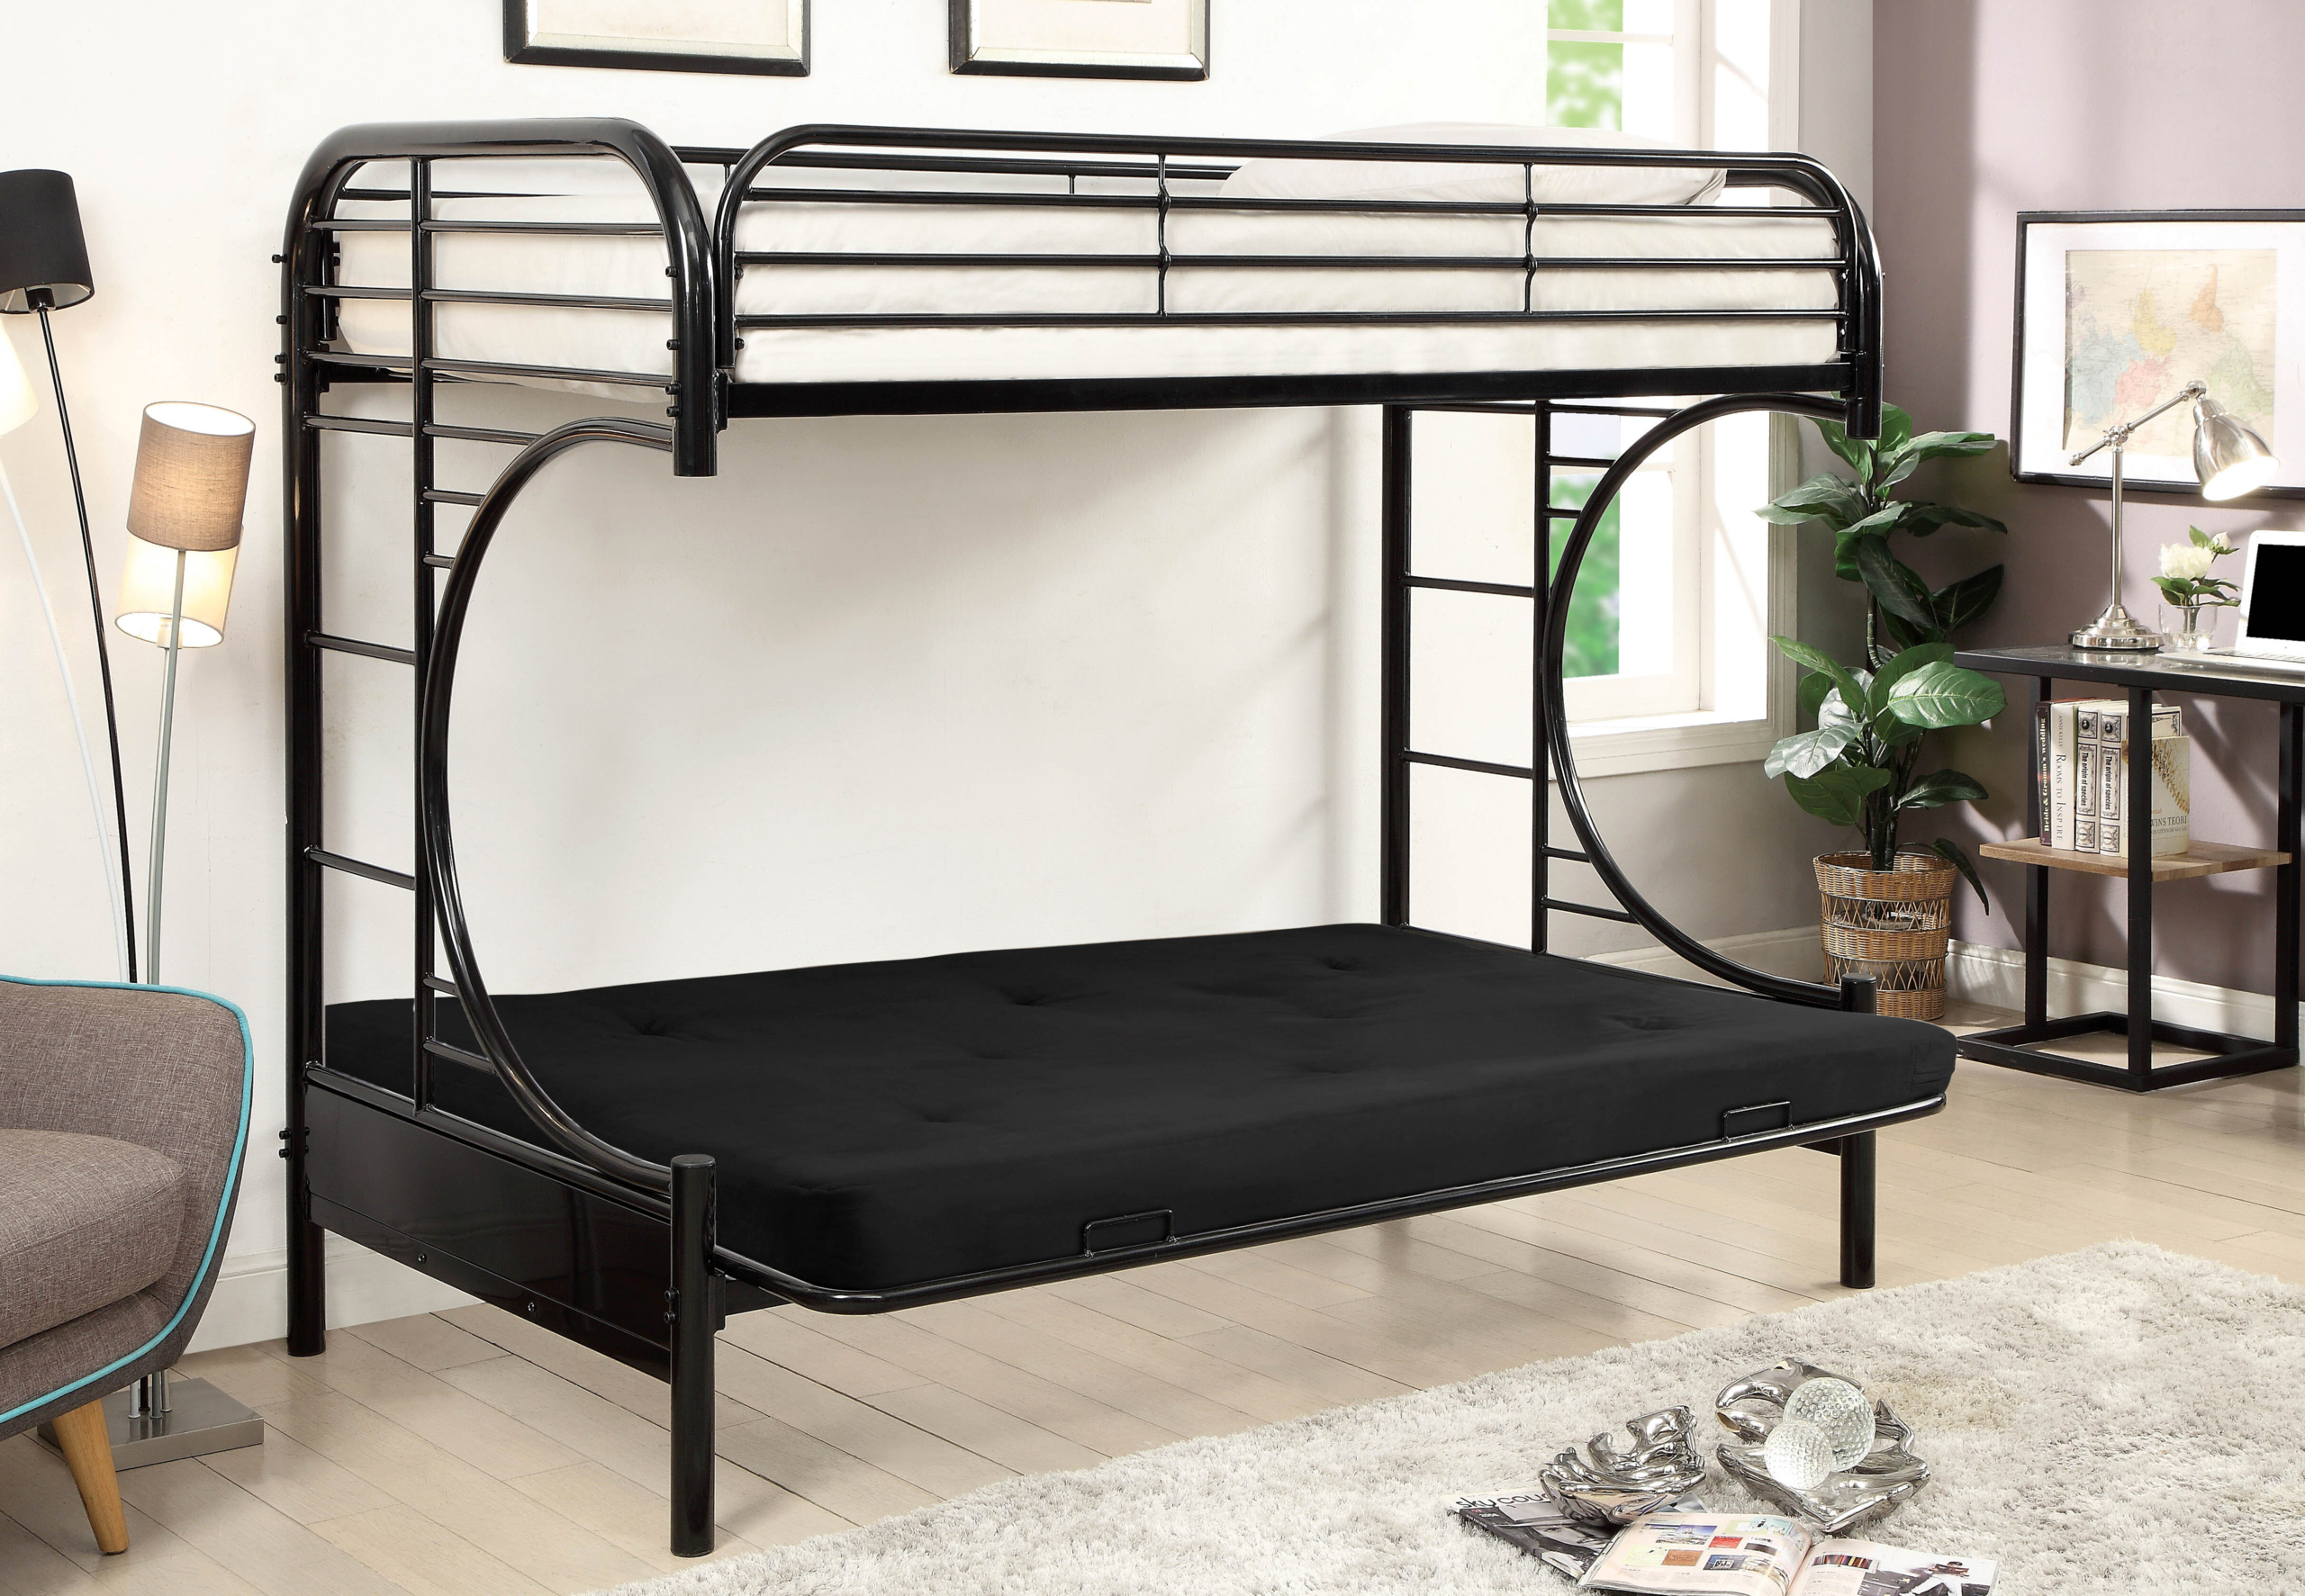 Full Over Futon Bunk Bed Visualhunt, Twin Futon Bunk Bed